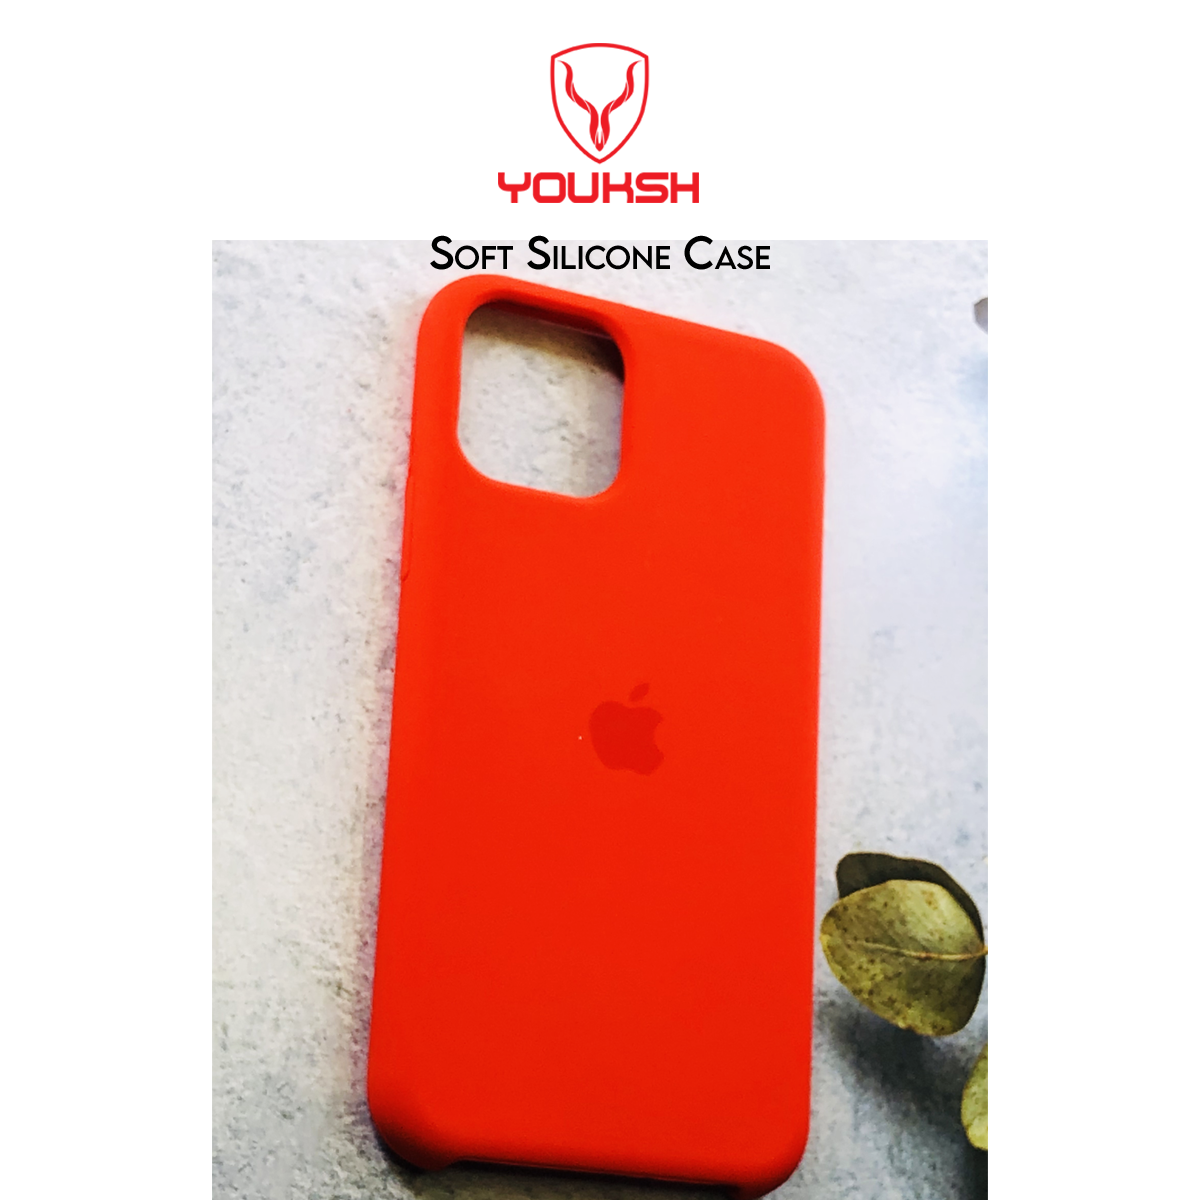 Apple iPhone 11 - Youksh Premium Ultra Slim Shockproof Liquid Silky Silicone Soft Rubber Comfortable Protective Case.